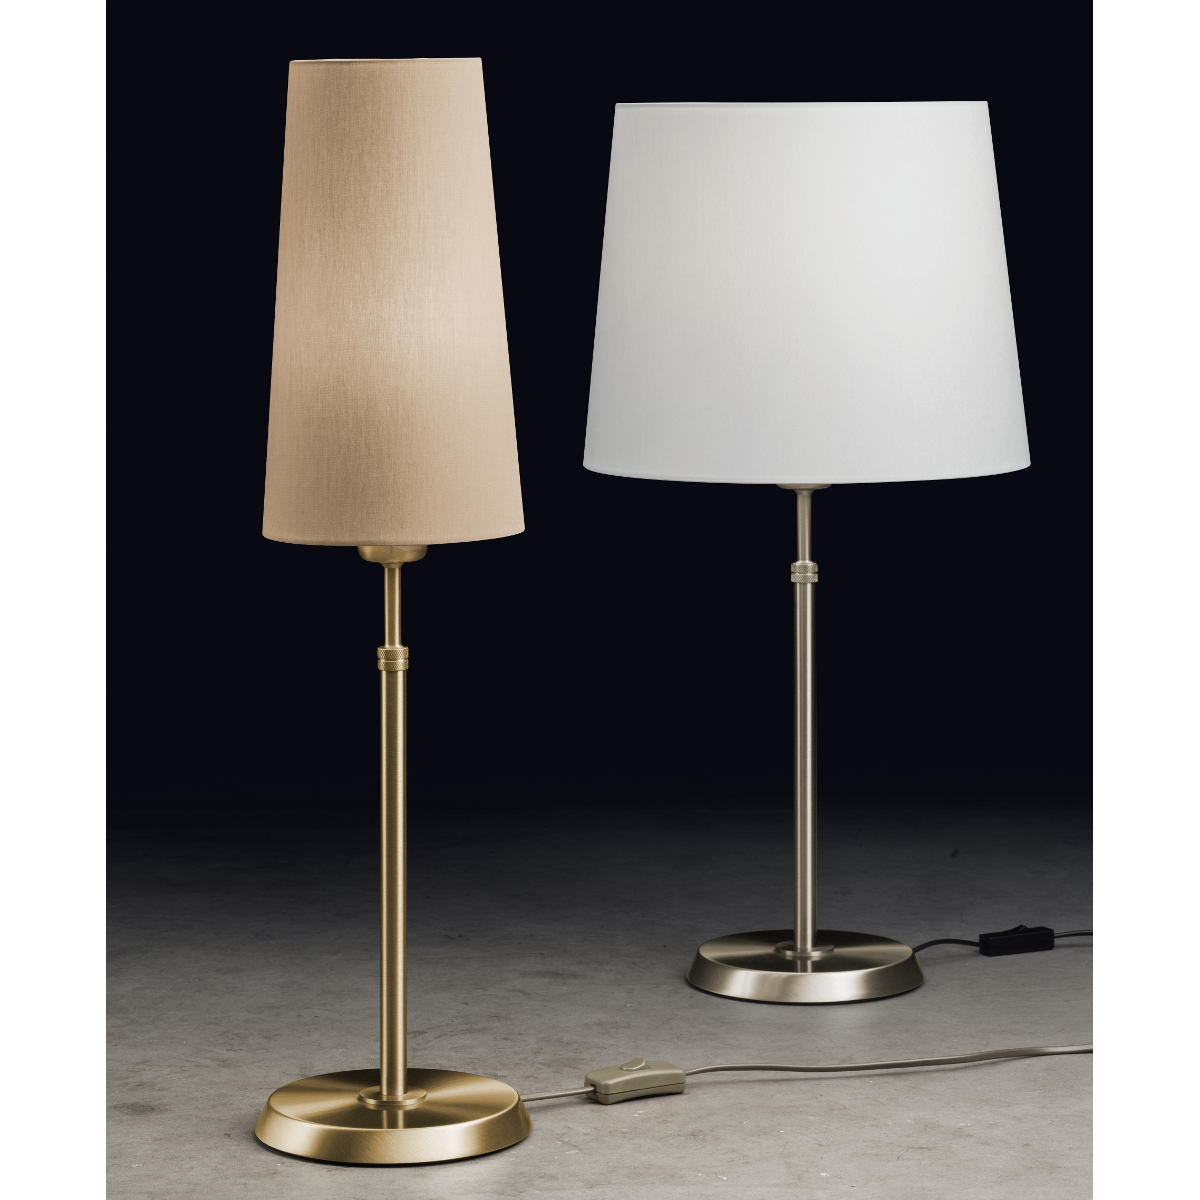 Slim Brass Table Light 6263 With Fabric Shade Made Of Chintz